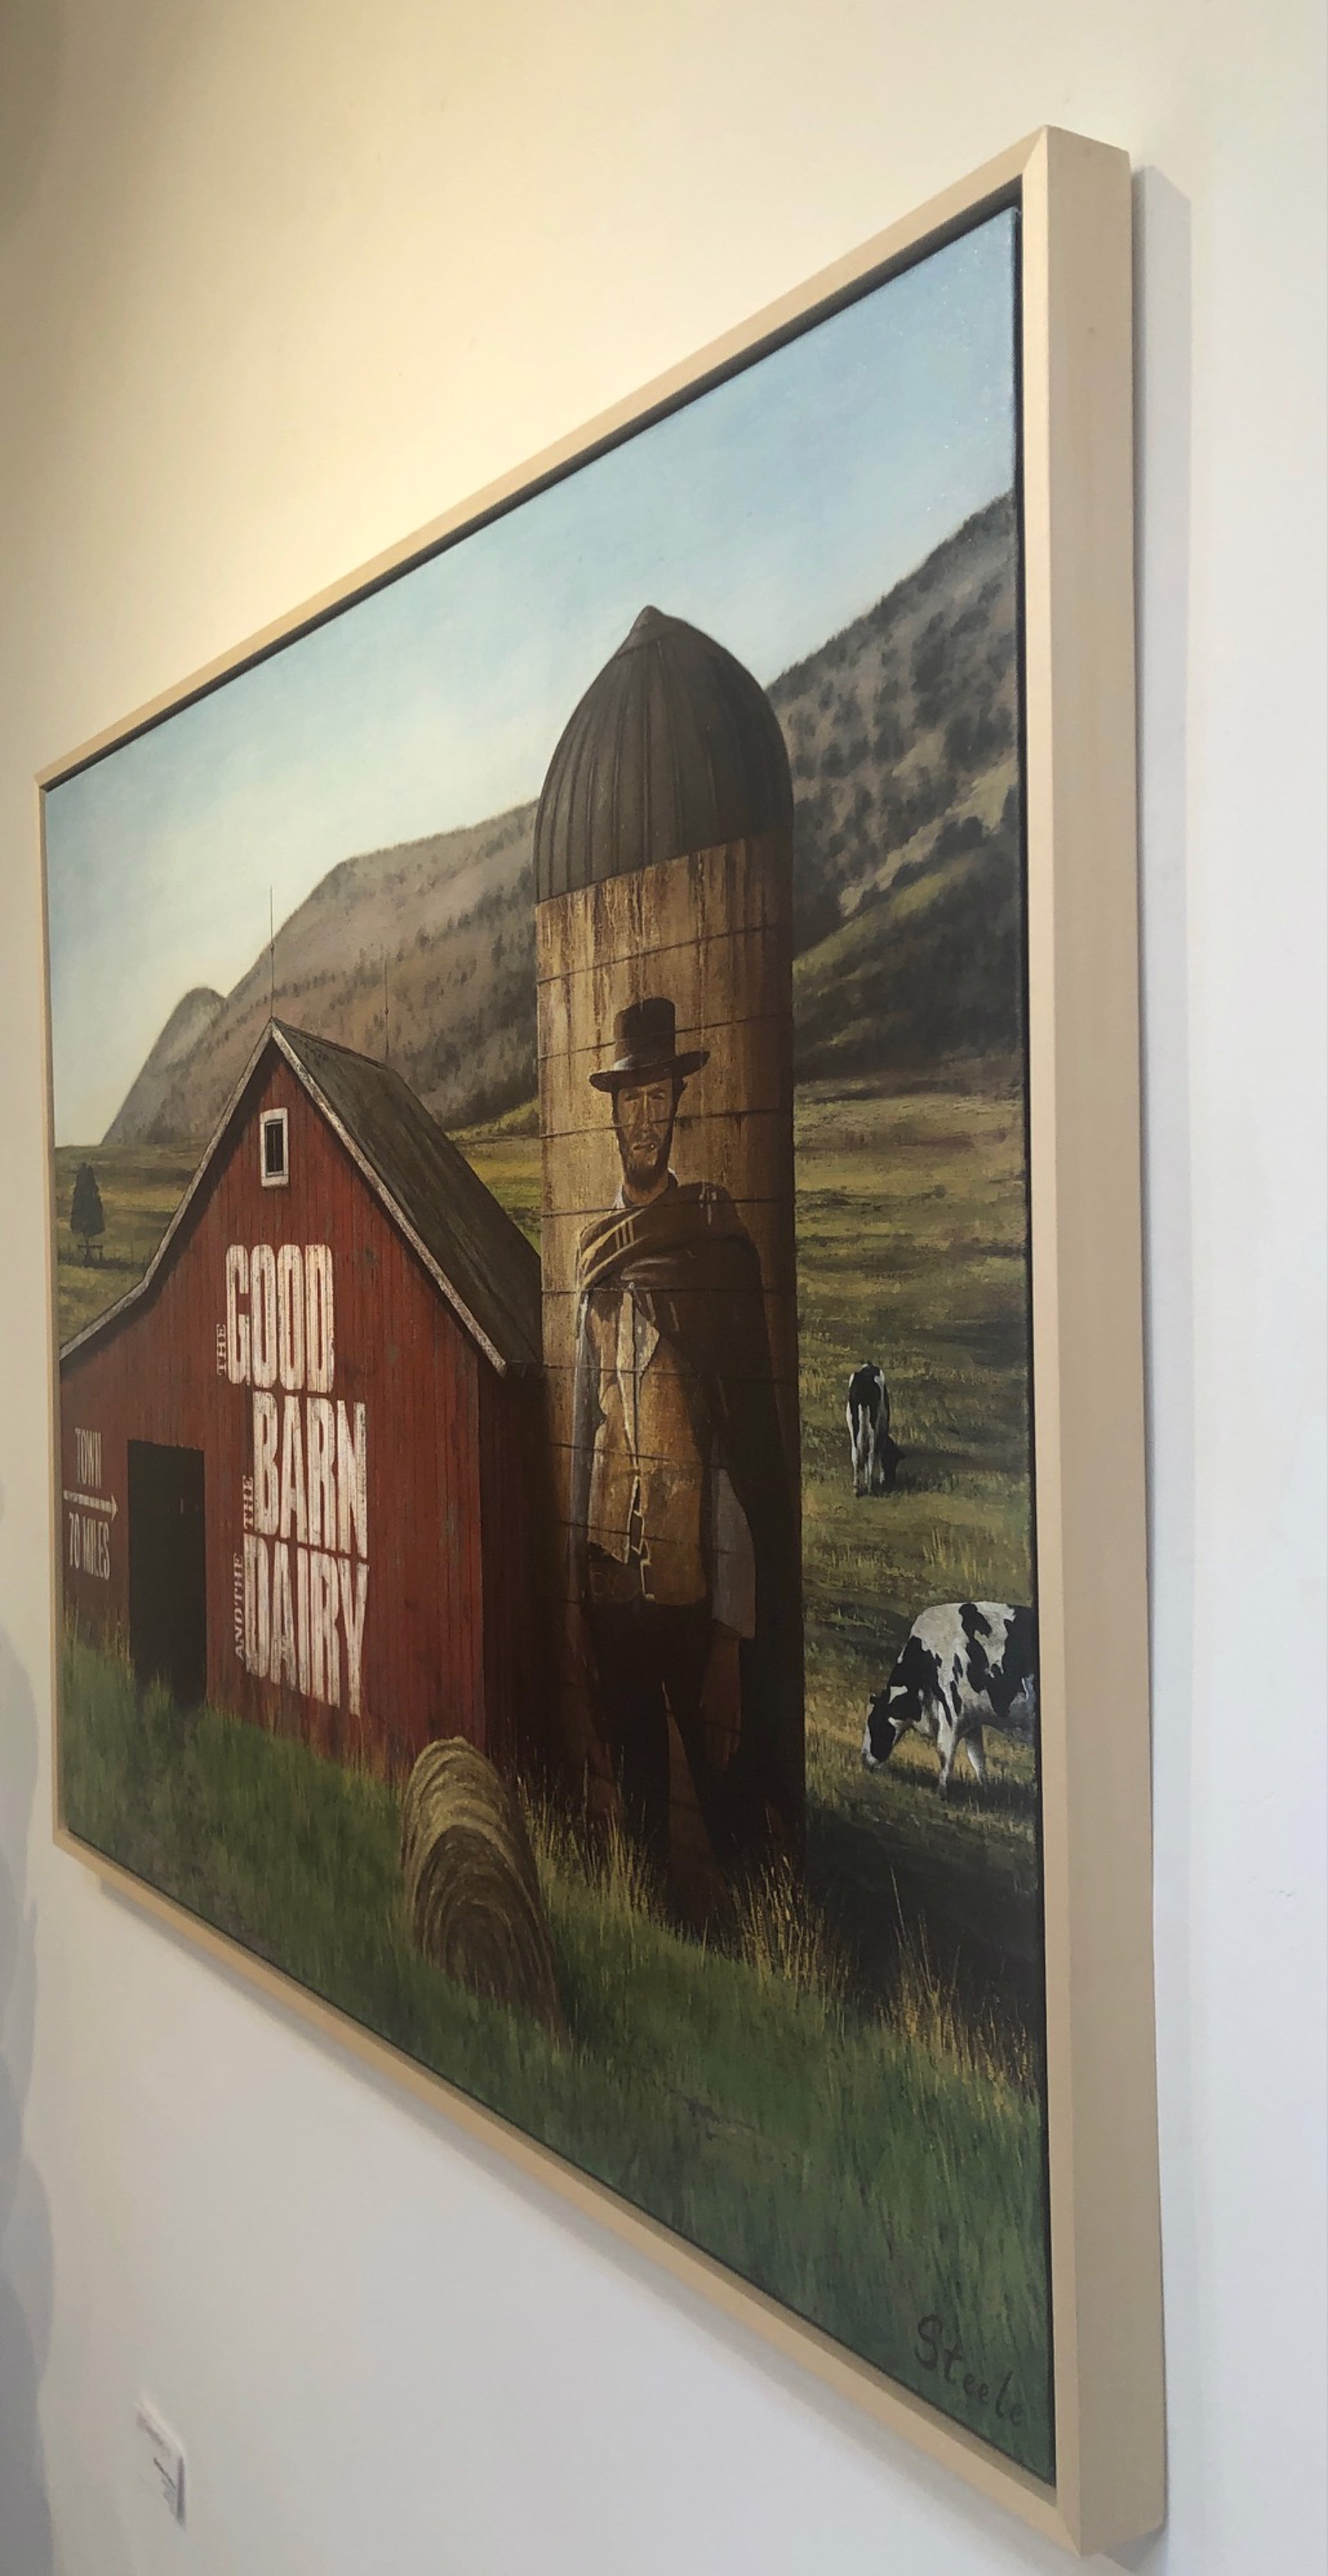 The Good, the Barn and the Dairy by Ben Steele